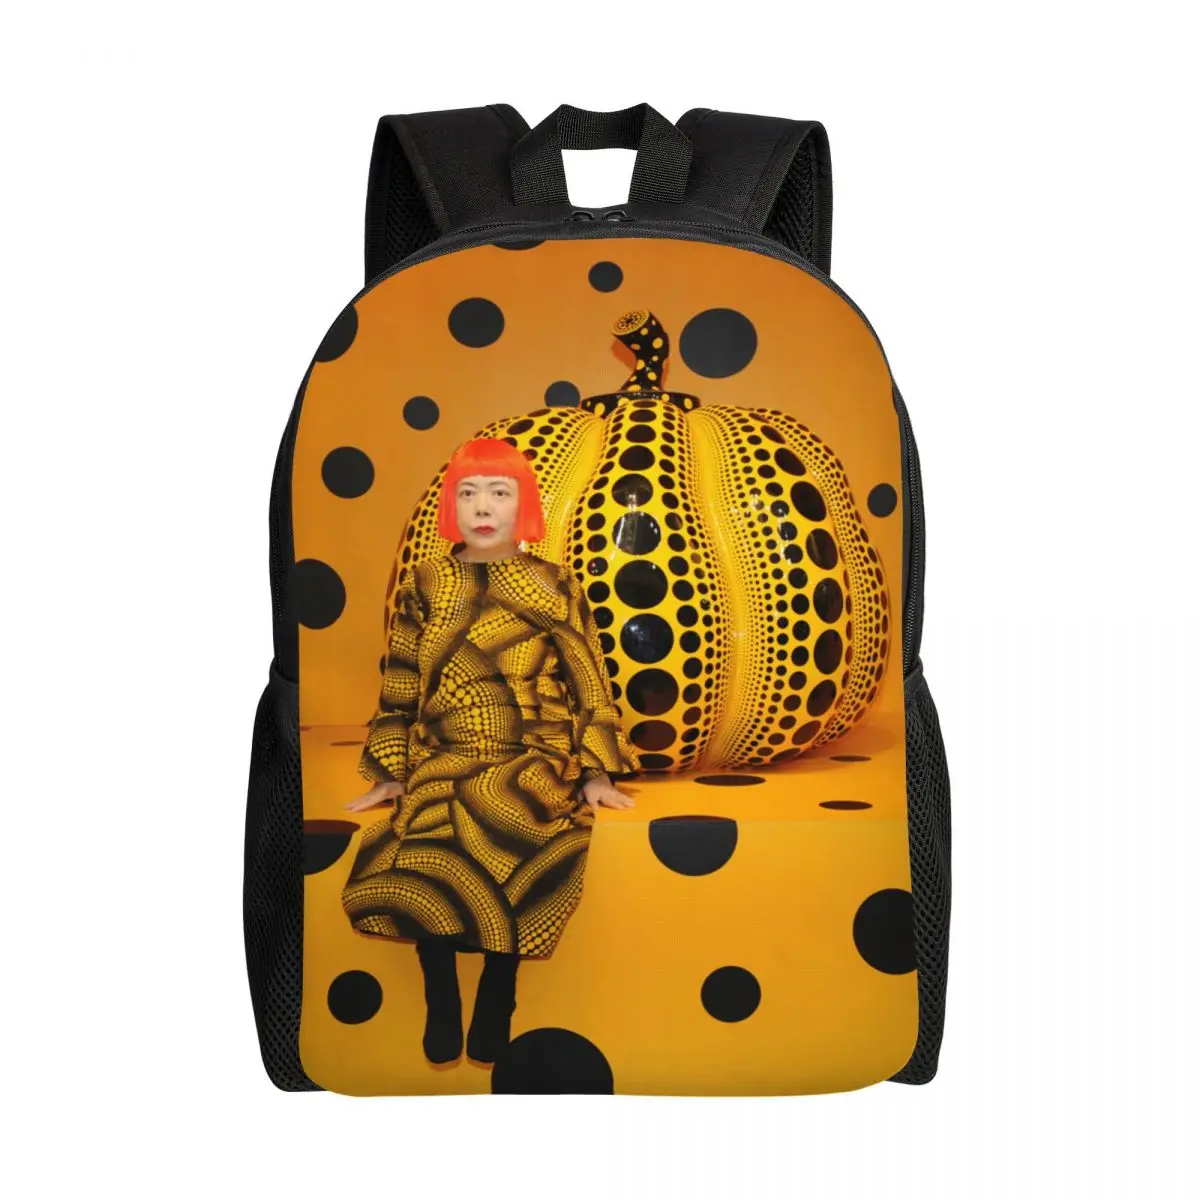 

Yayoi Kusama Pumkin Backpack for Men Women College School Student Bookbag Fits 15 Inch Laptop Abstract Art Bags